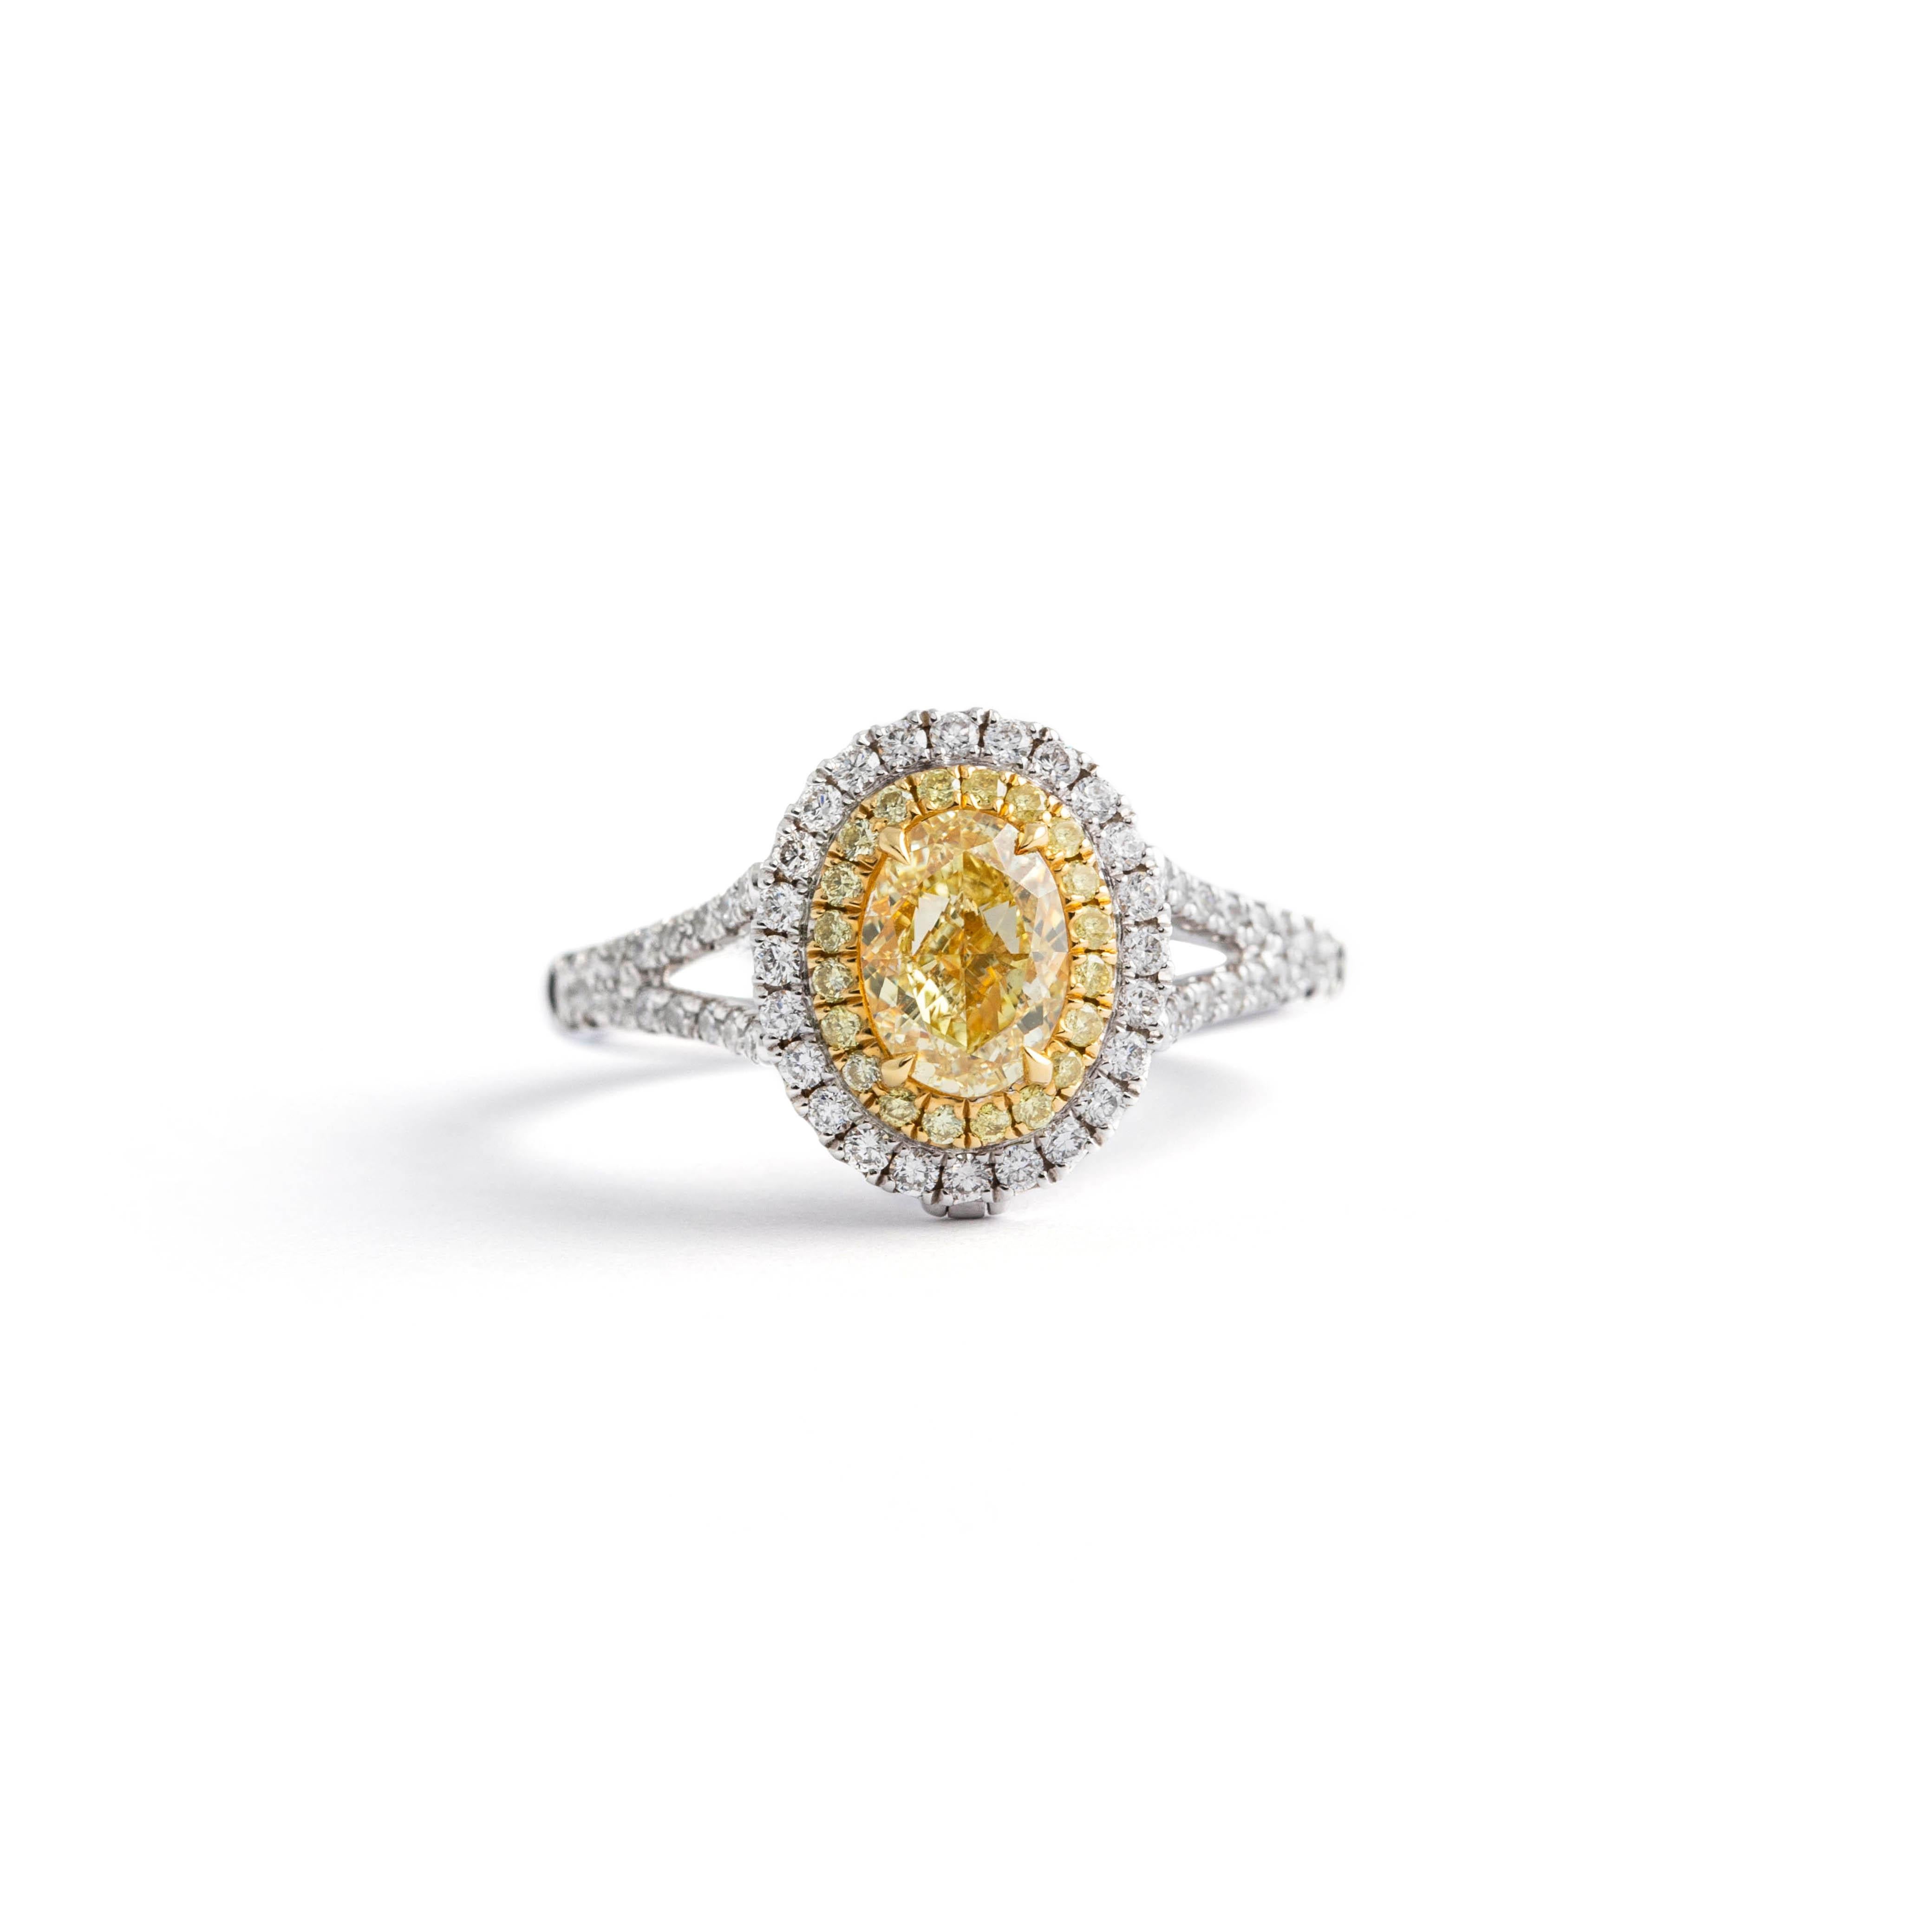 Oval Natural Diamond Center 1.00 carat. GIA certificate. Fancy Yellow, SI1 clarity. 
18K Gold Ring convertible Pendant.
Round white diamond x 58 : 0.37 carat.
Fancy yellow small diamond x 20: 0.11 carat.

Total weight: 5.08 grams.